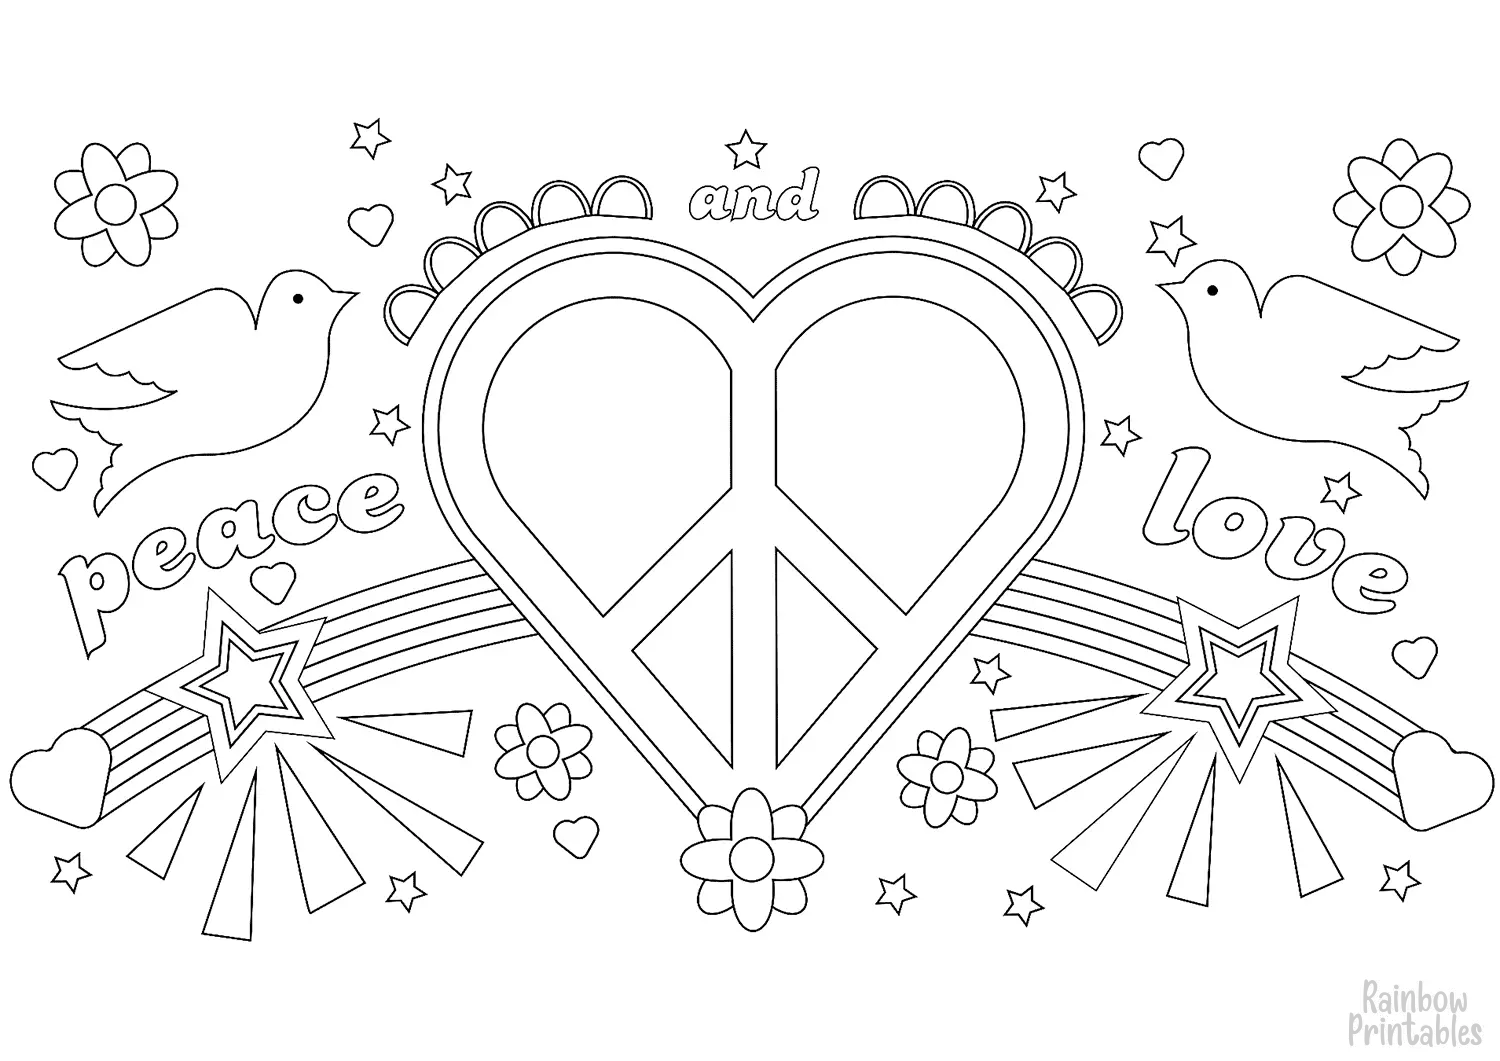 Valentine DAY HEART SHAPE PEACE LOVE BIRD HIPPIE Line Art Clipart Coloring Pages for Kids Adults Art Activities Line Art-15